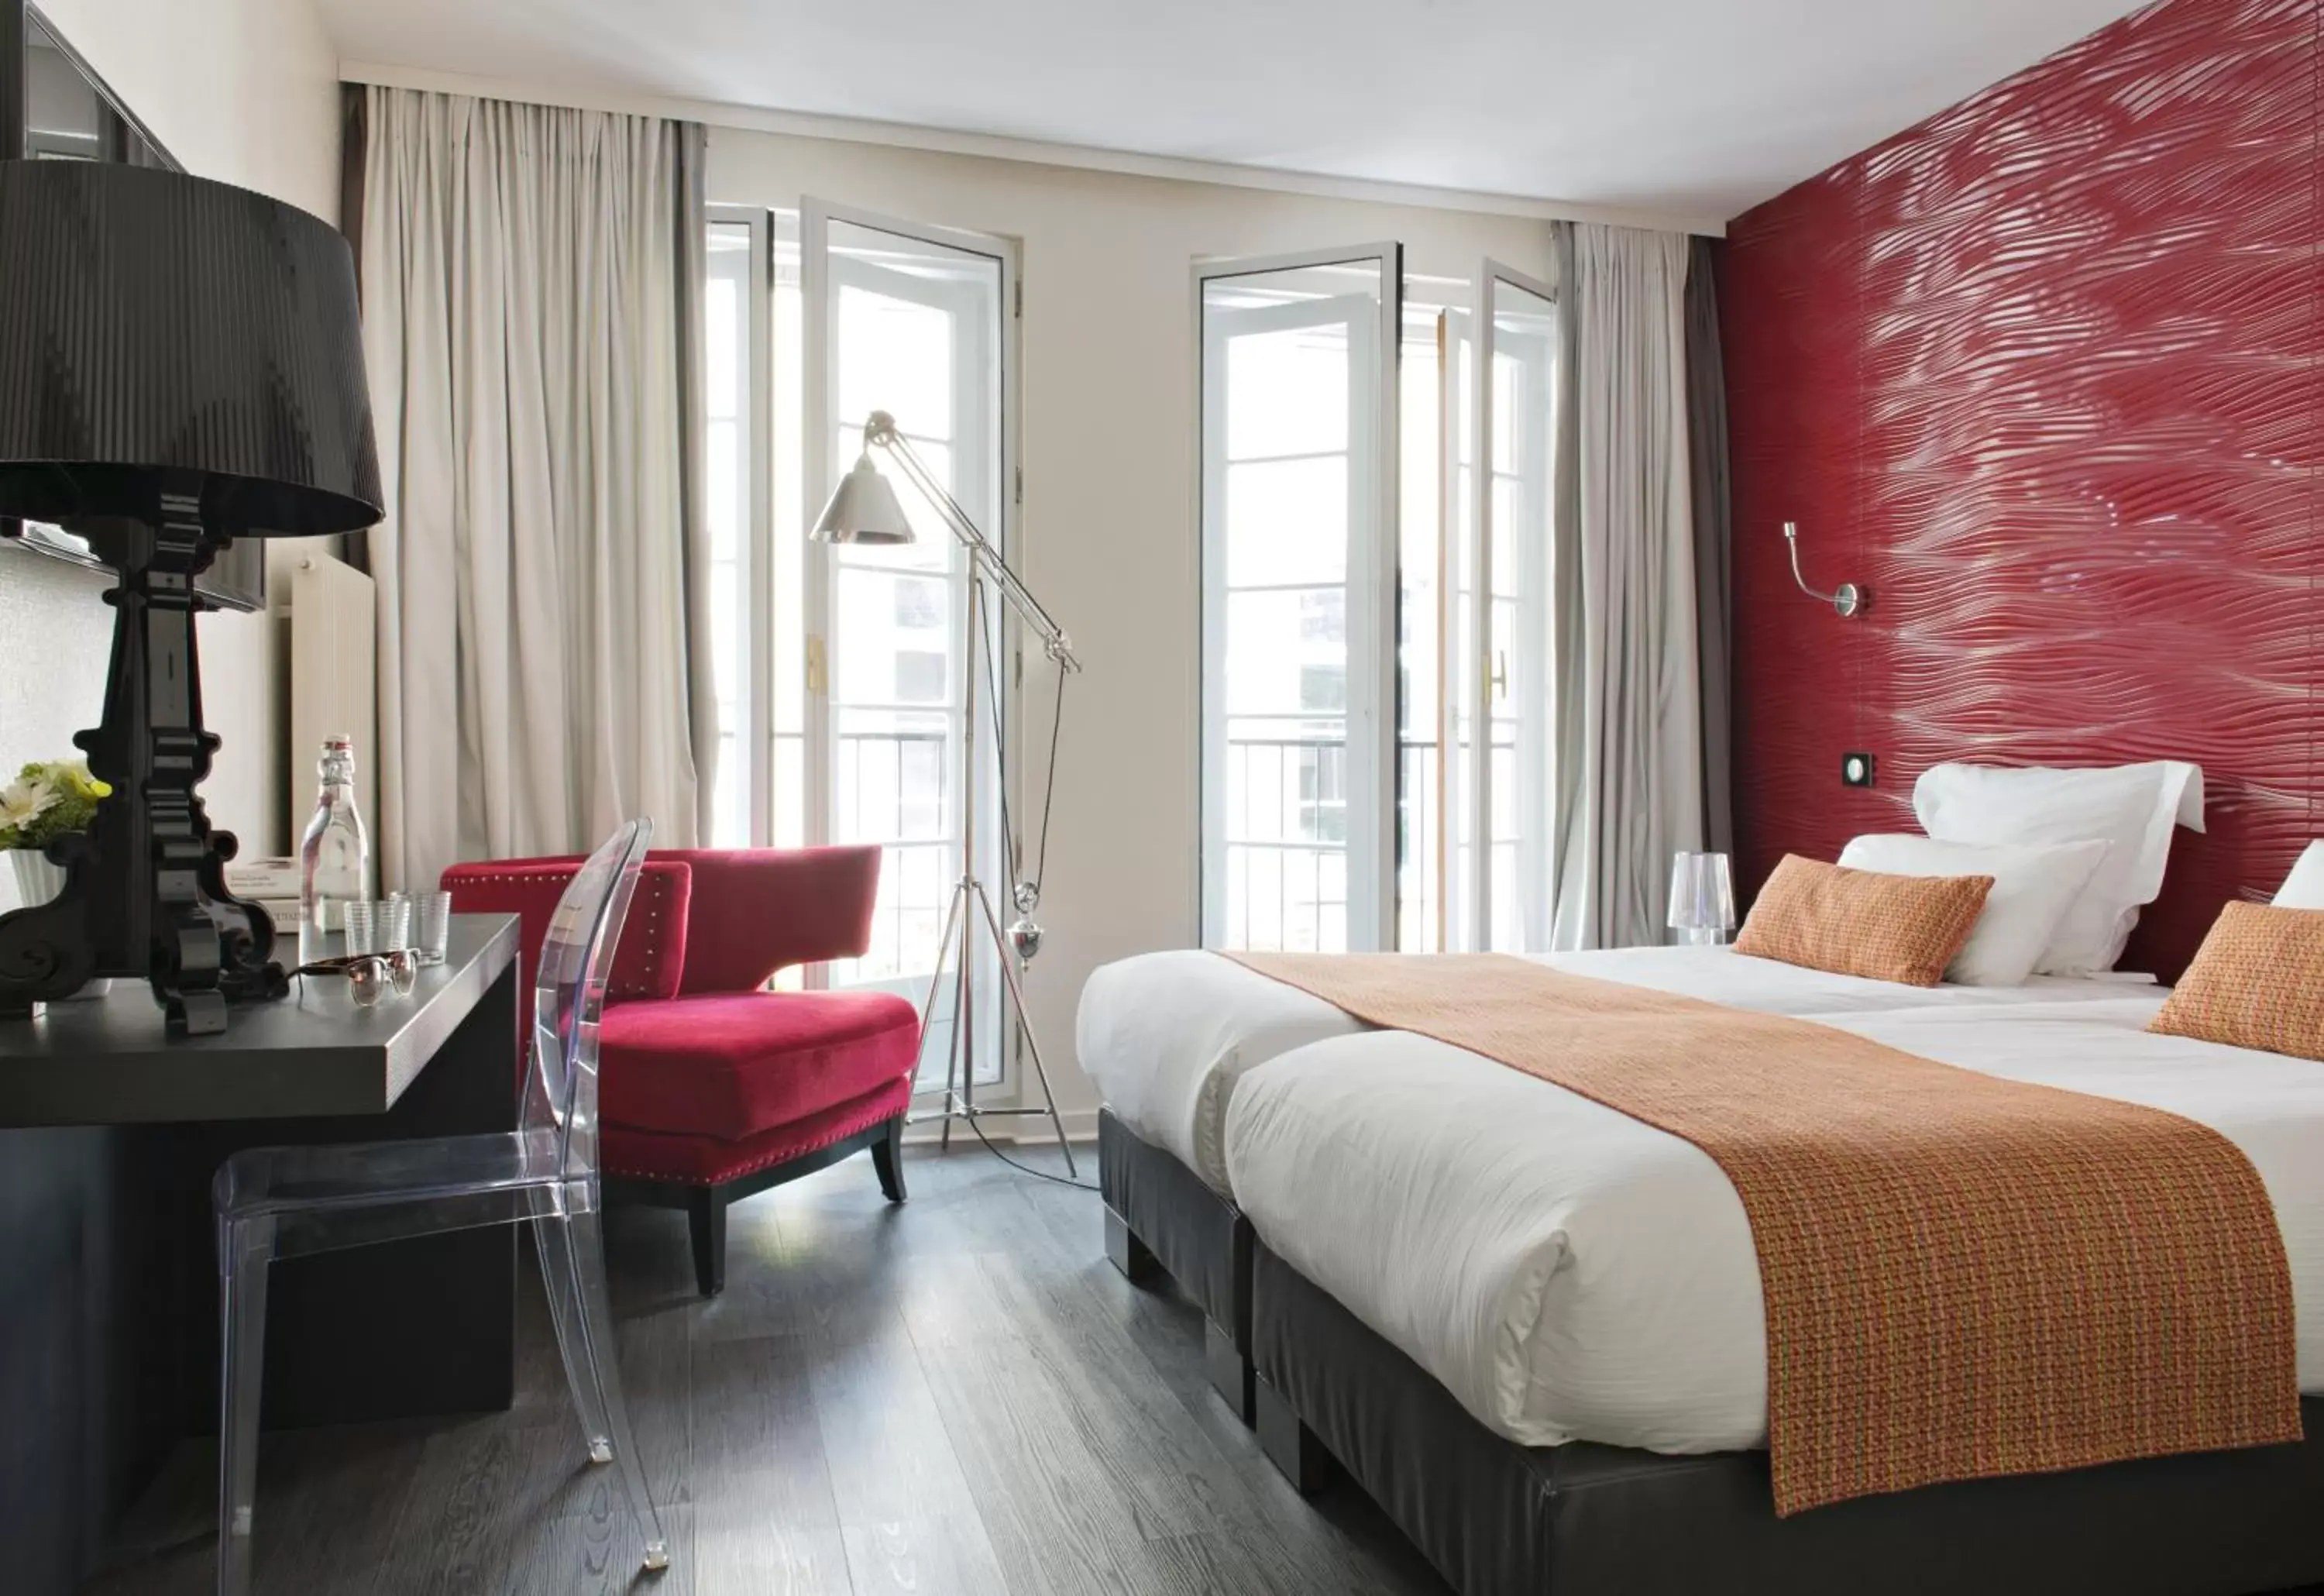 Deluxe Twin Room in Hotel Rohan, Centre Cathédrale